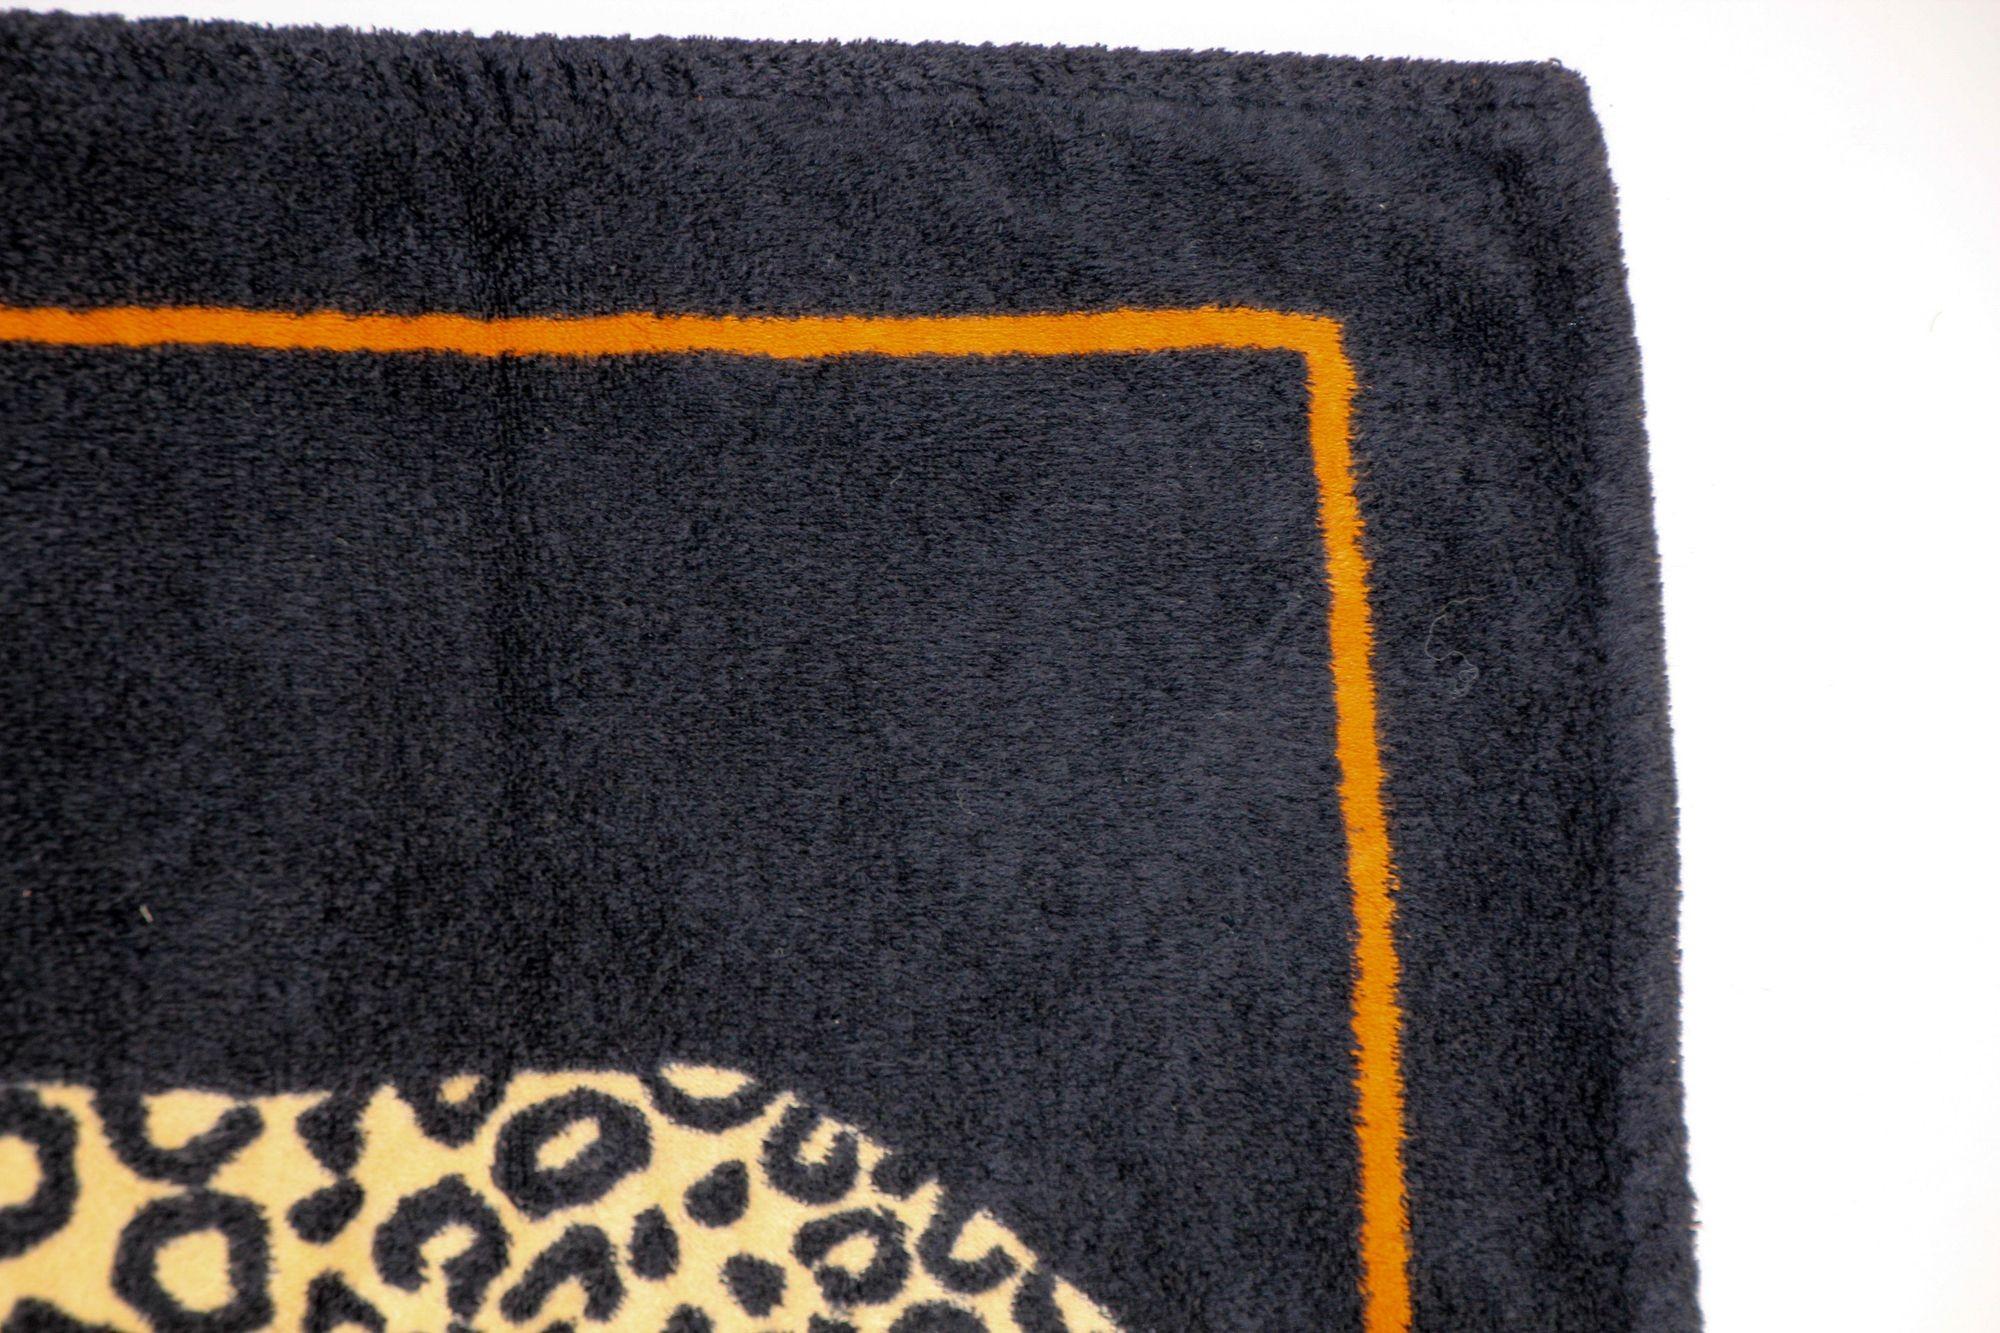 Contemporary Hermes Paris Small Bath Mat with a Leopard Print in Black and Orange